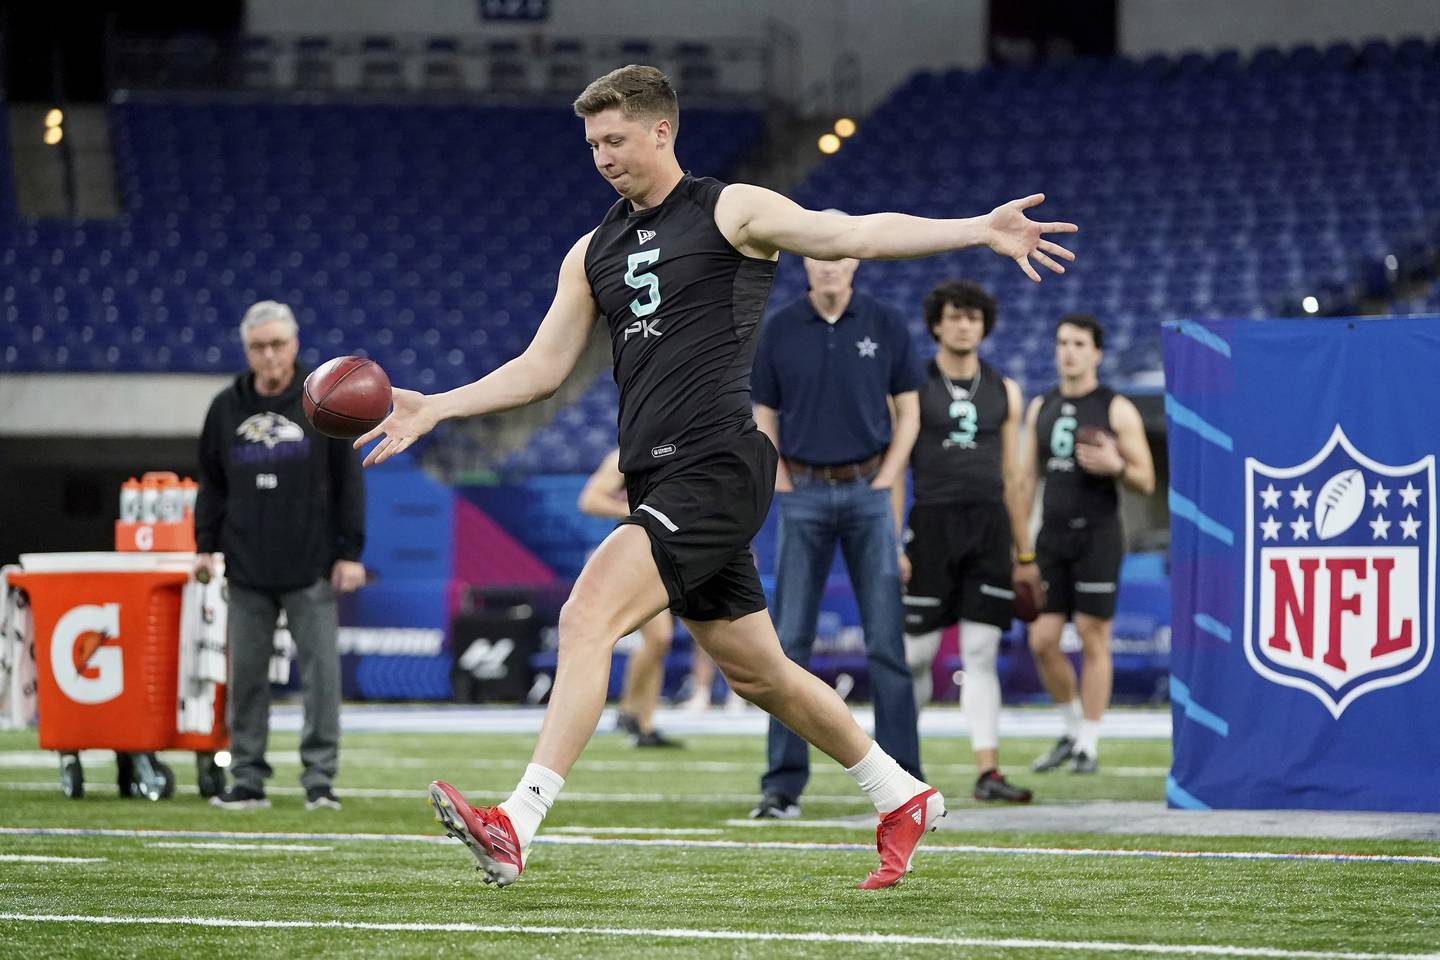 North Carolina State kicker Trenton Gill participates in a drill at the NFL Scouting Combine on March 6, 2022 in Indianapolis.